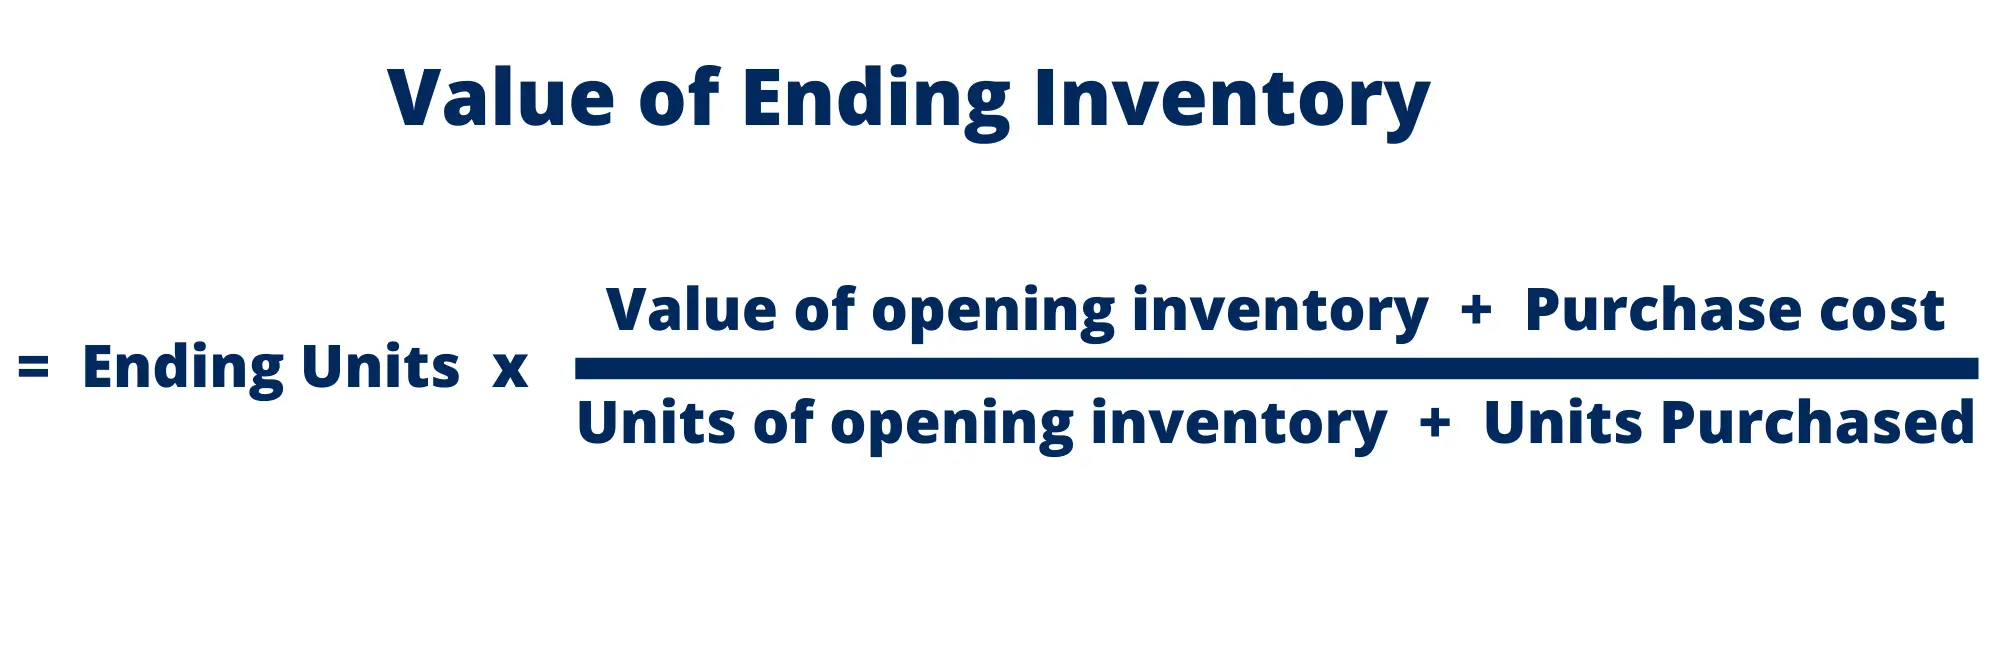 Value of Ending Inventory = Ending units * (Value of opening inventory + purchase cost) / (Units of opening inventory + units purchased)